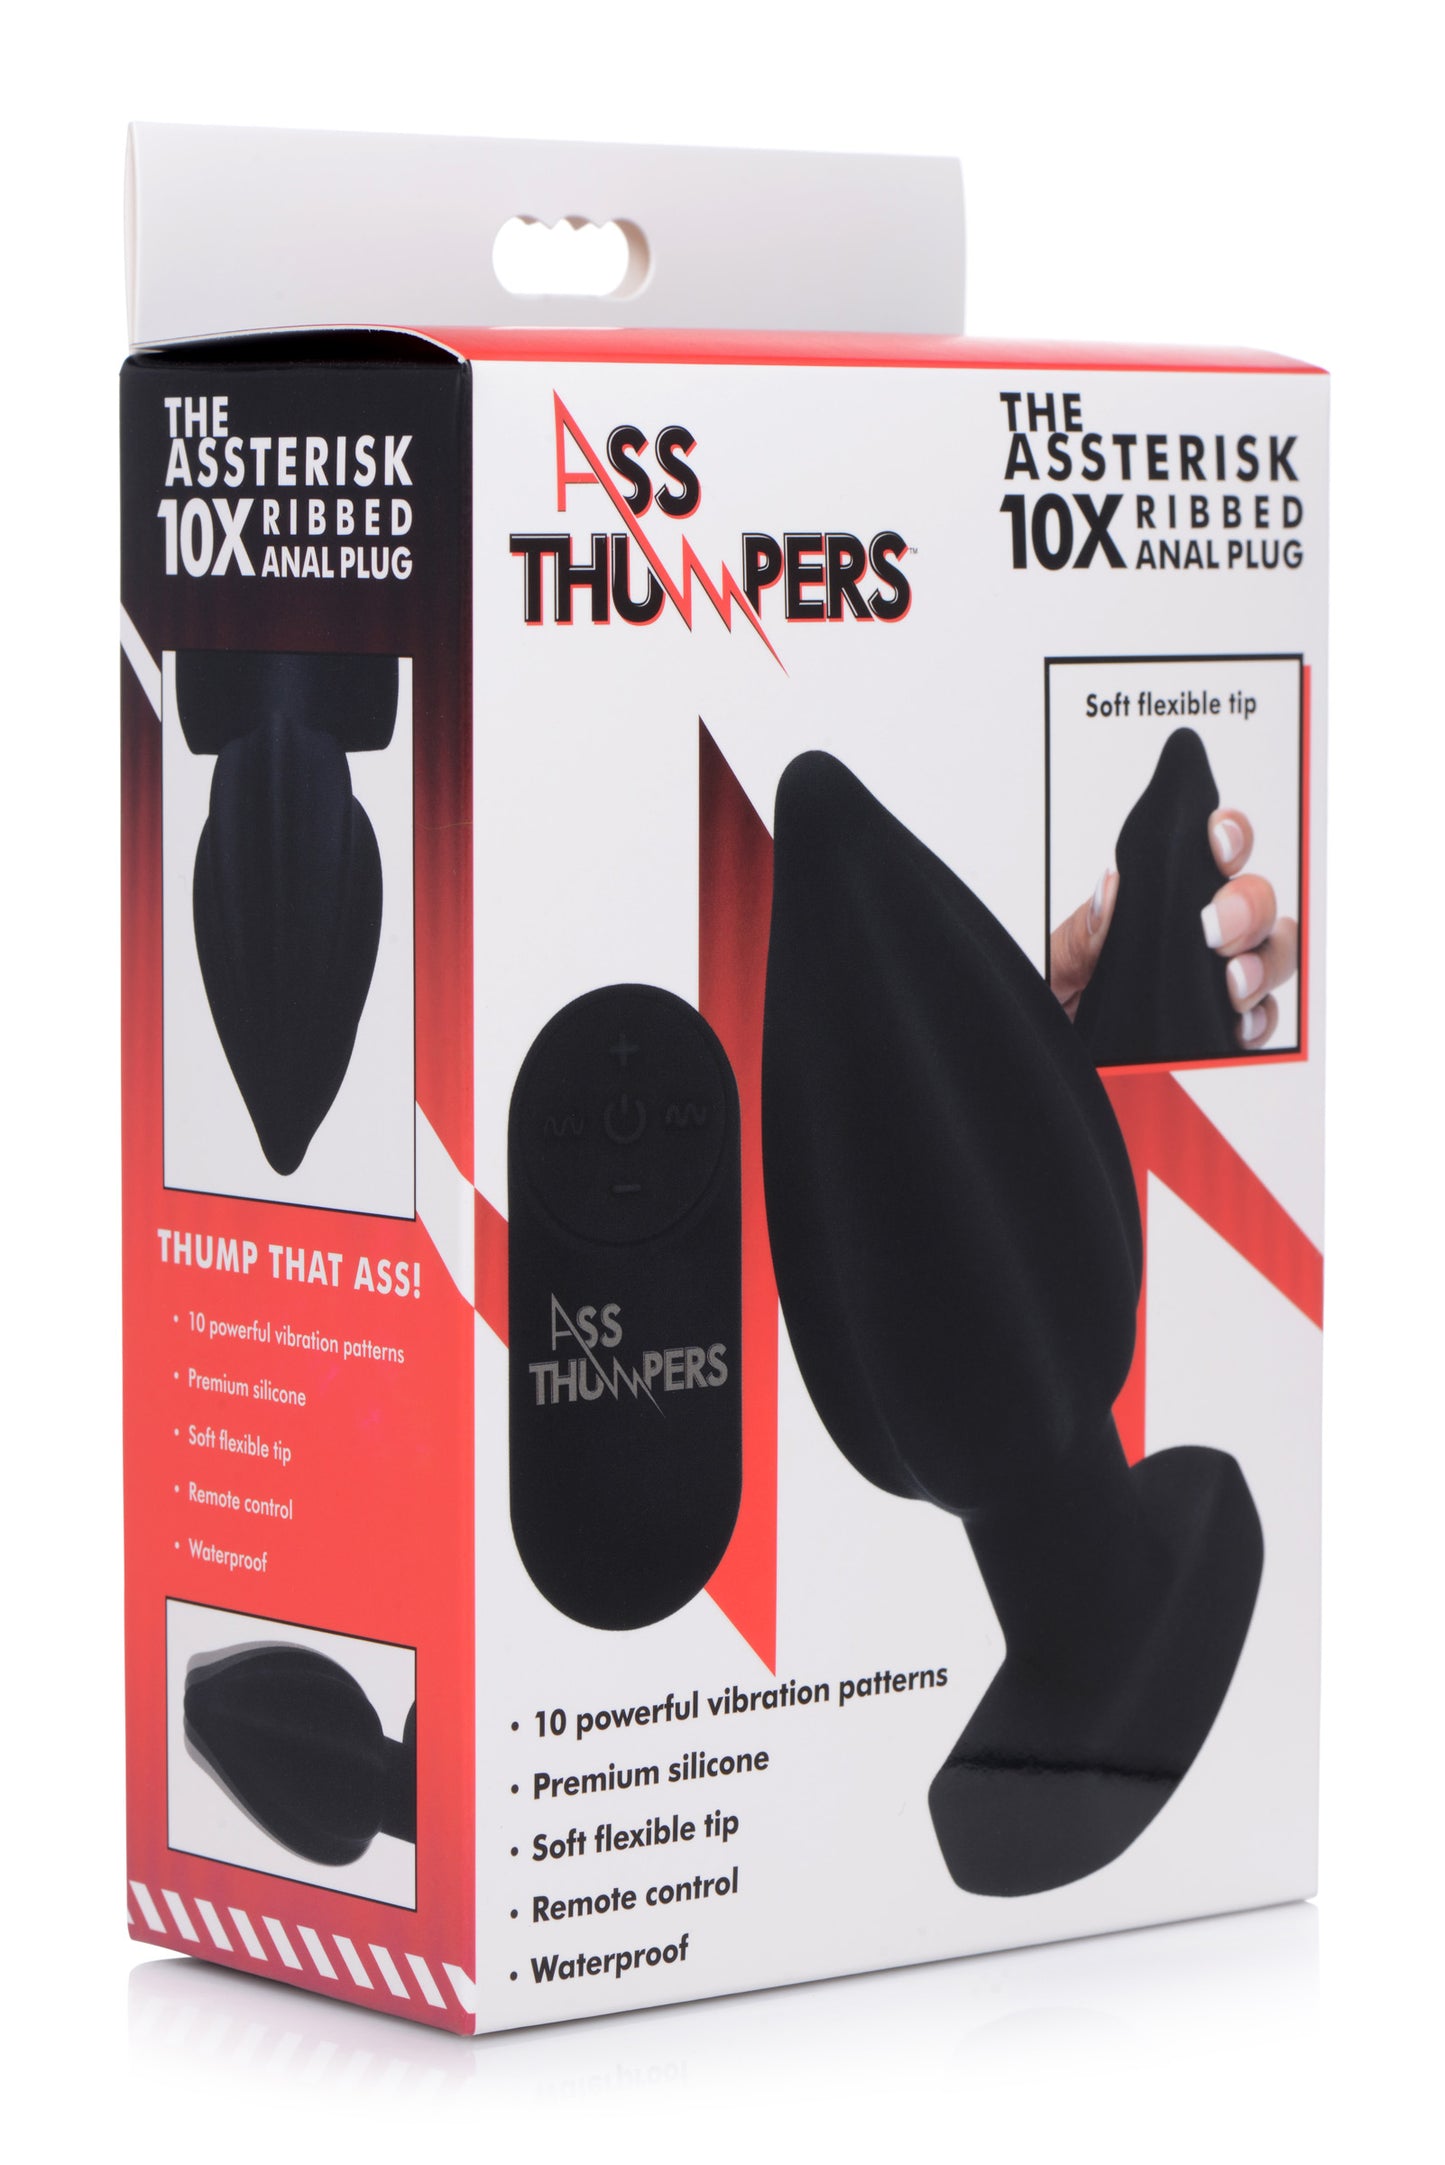 The Assterisk 10x Ribbed Silicone Remote Control Vibrating Butt Plug